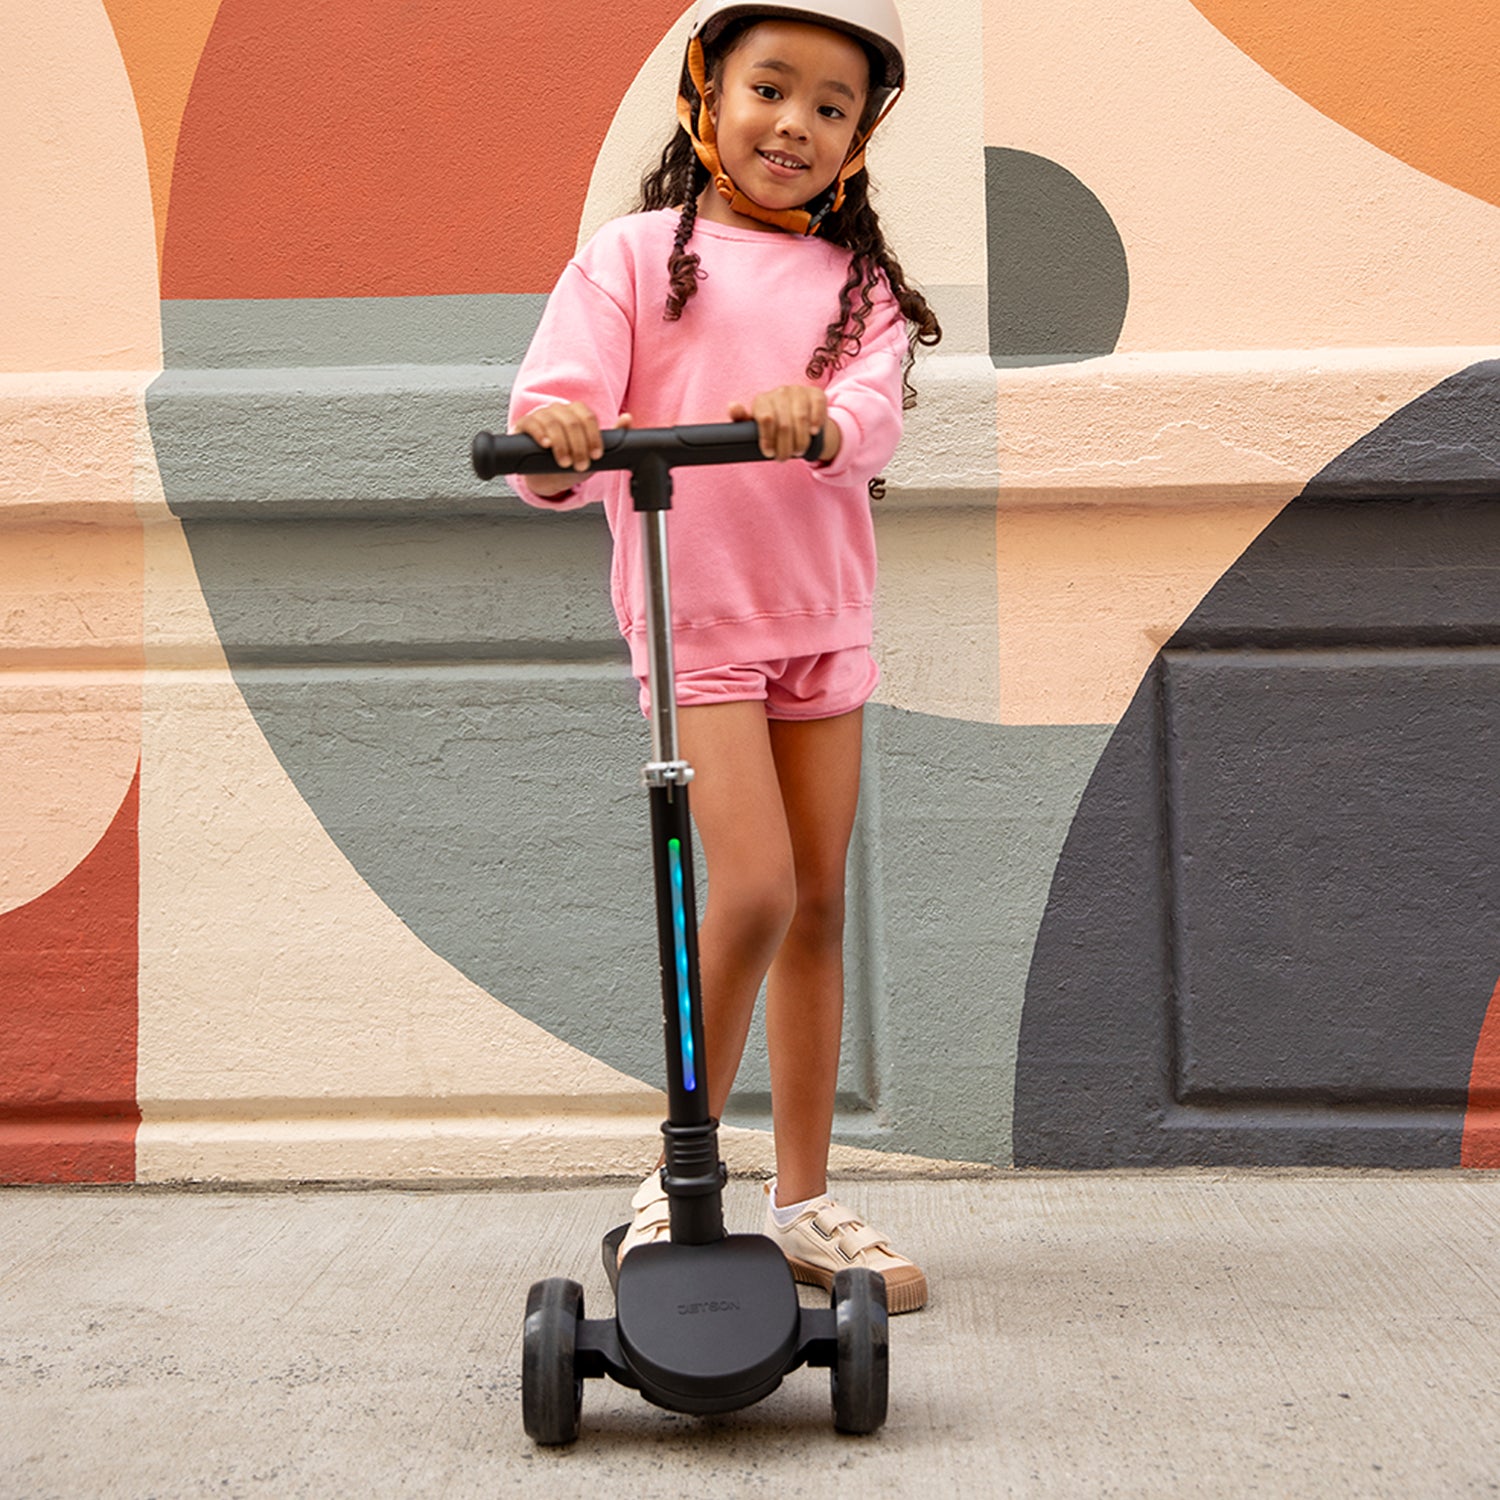 young girl standing on amber kick scooter facing forward